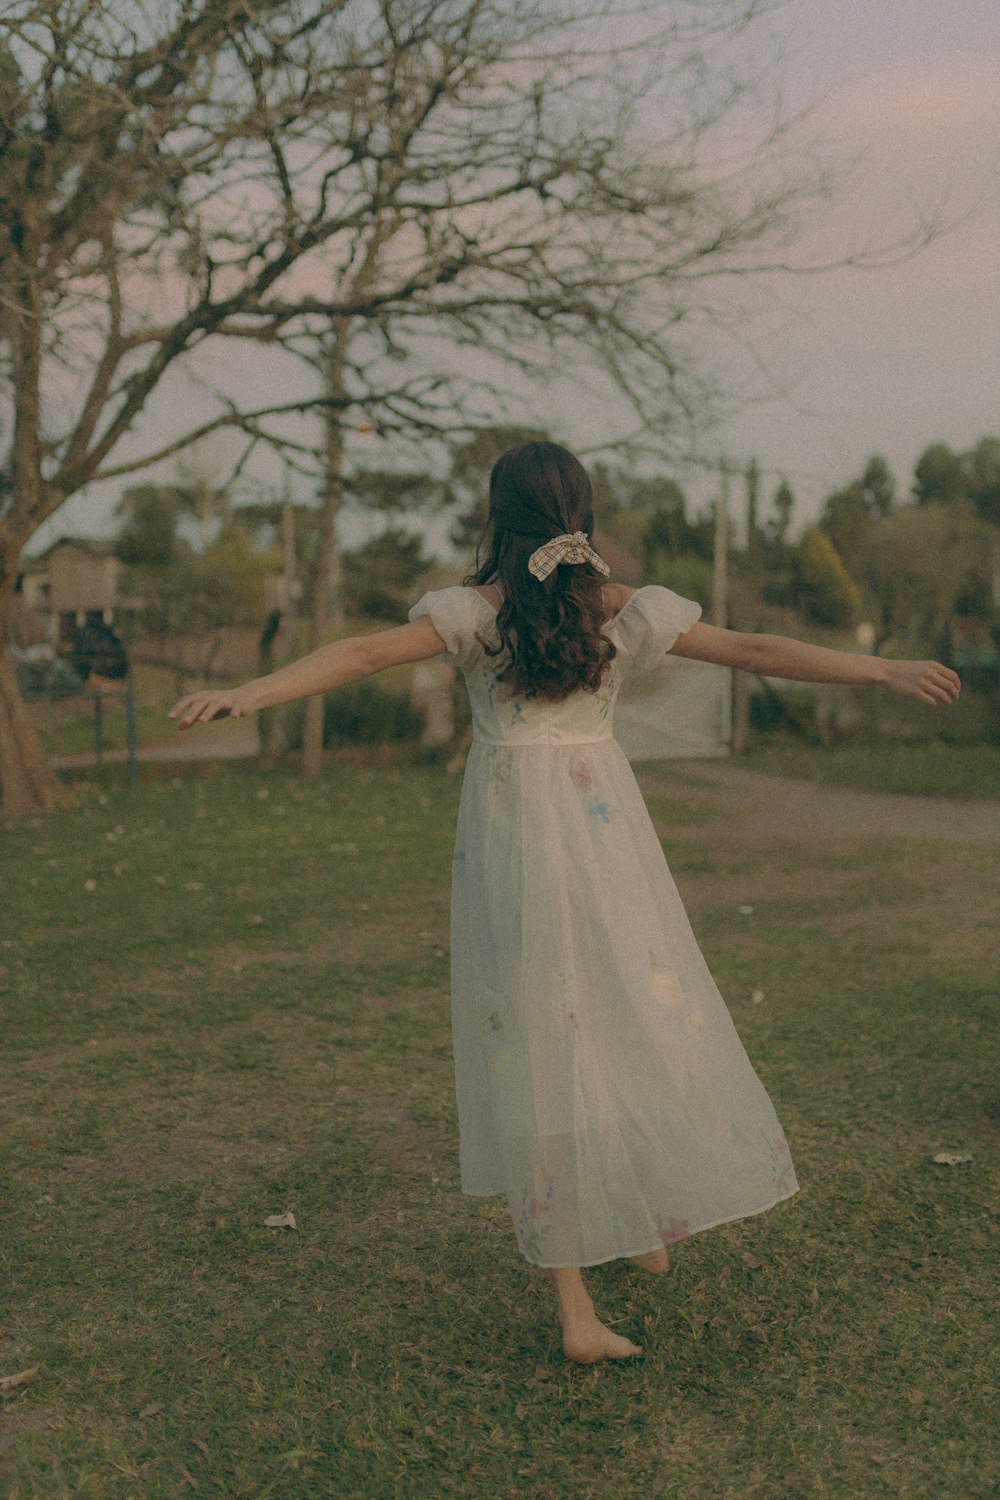 a young girl in a white dress standing in a field